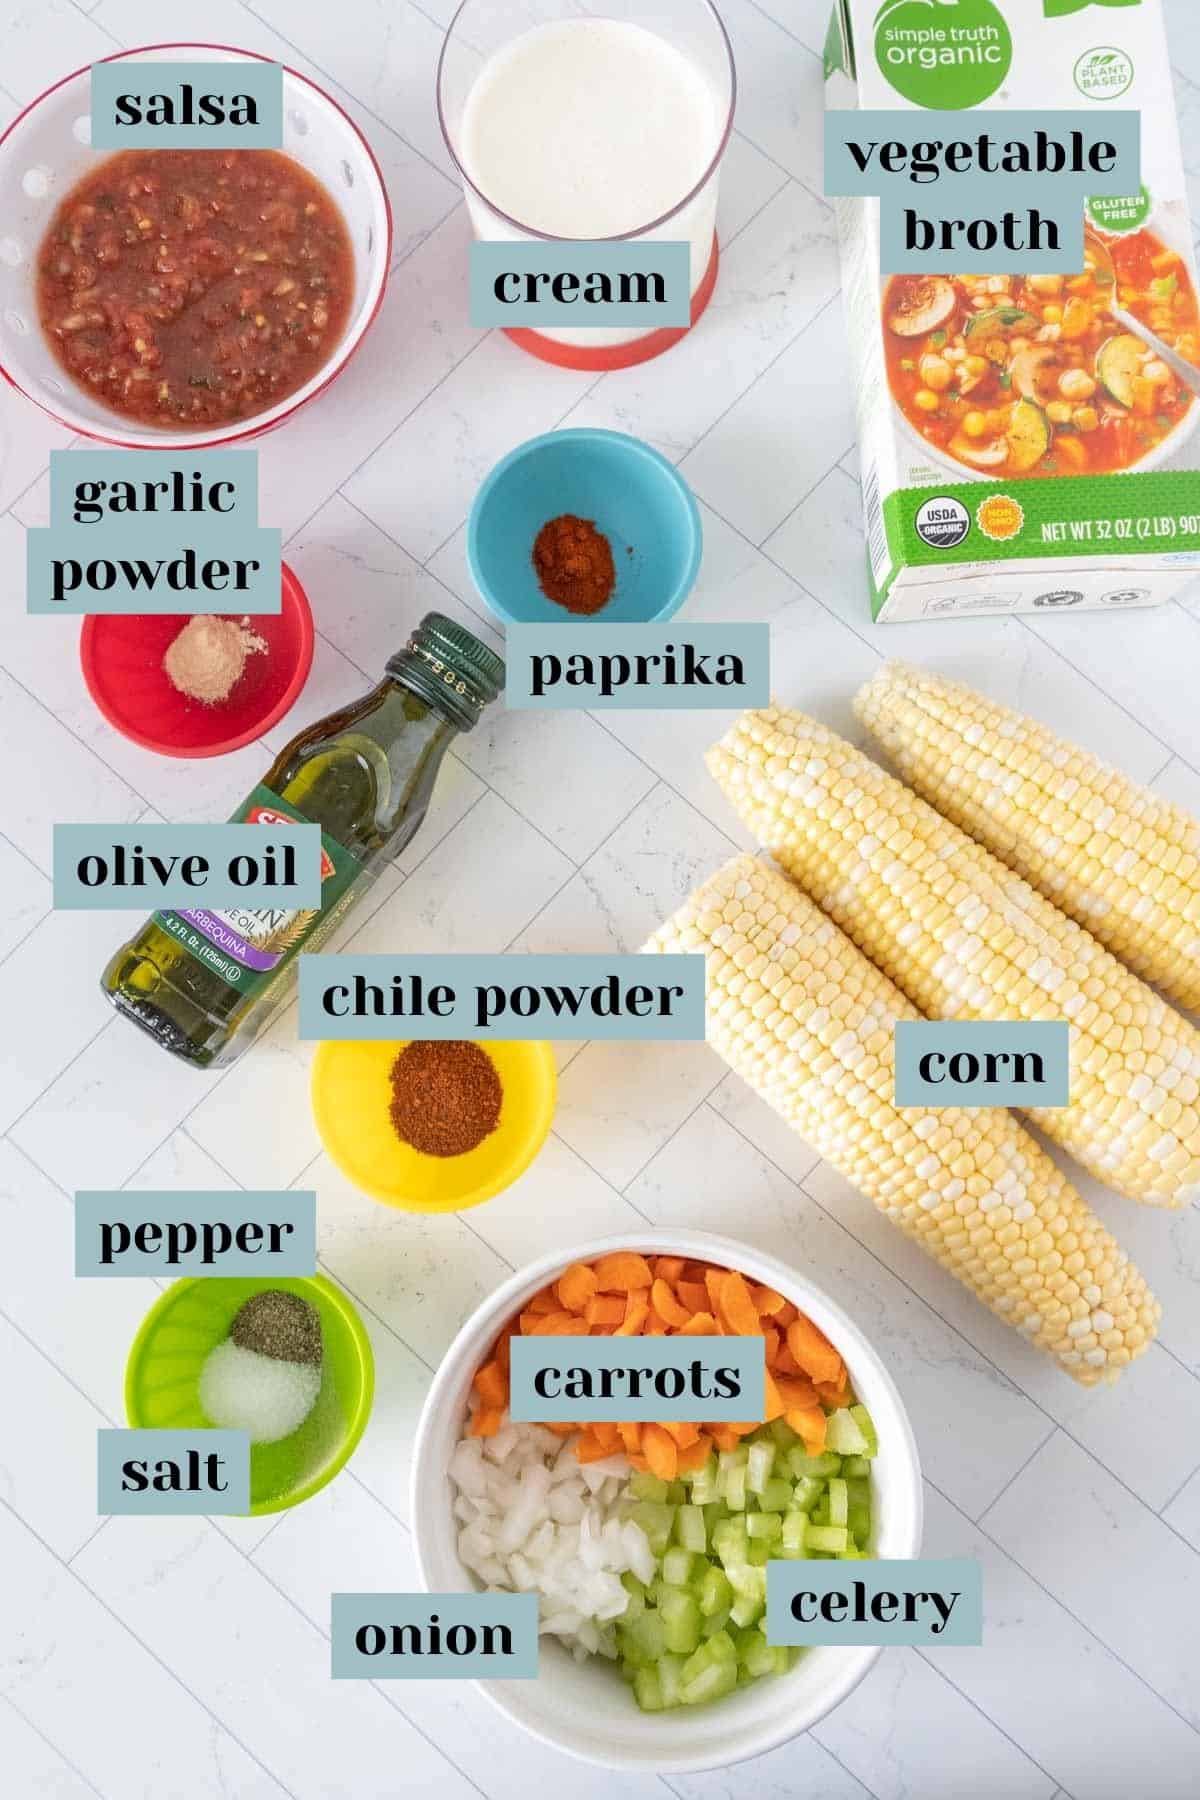 Ingredients for corn soup on a tile surface with labels.